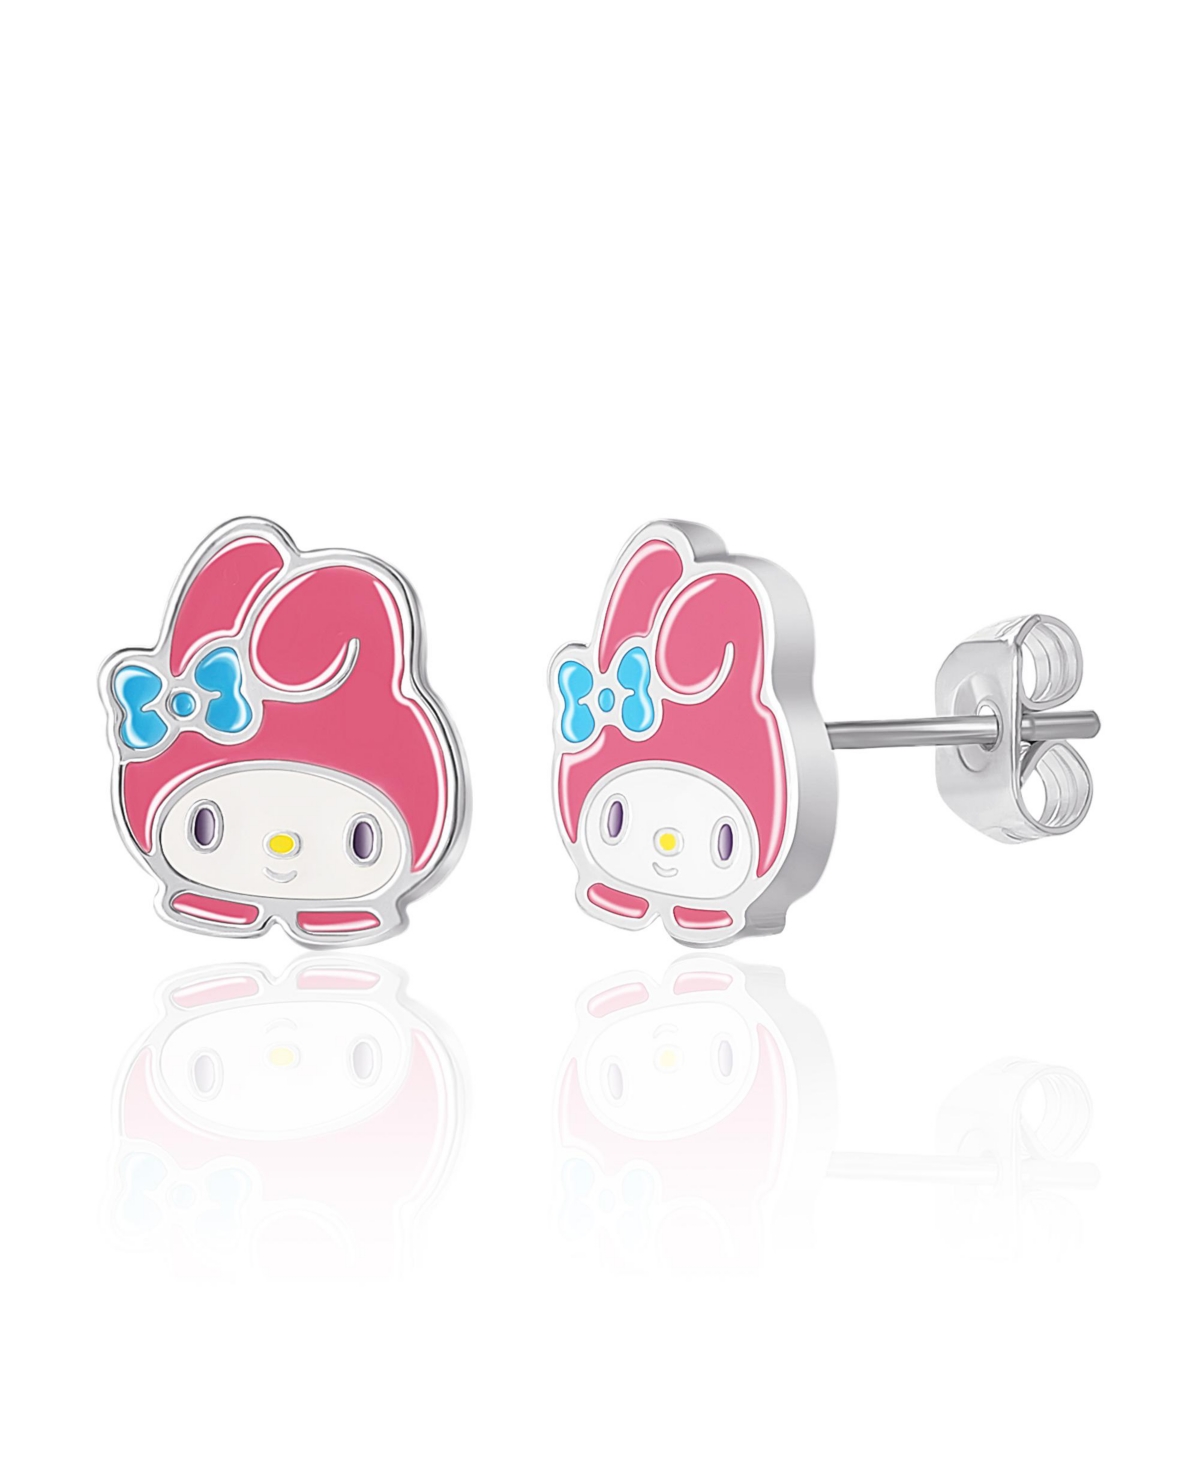 Sanrio Womens Hello Kitty and Friends Silver Plated and Enamel Stud Earrings - My Melody, Officially Licensed - Purple, blue, white